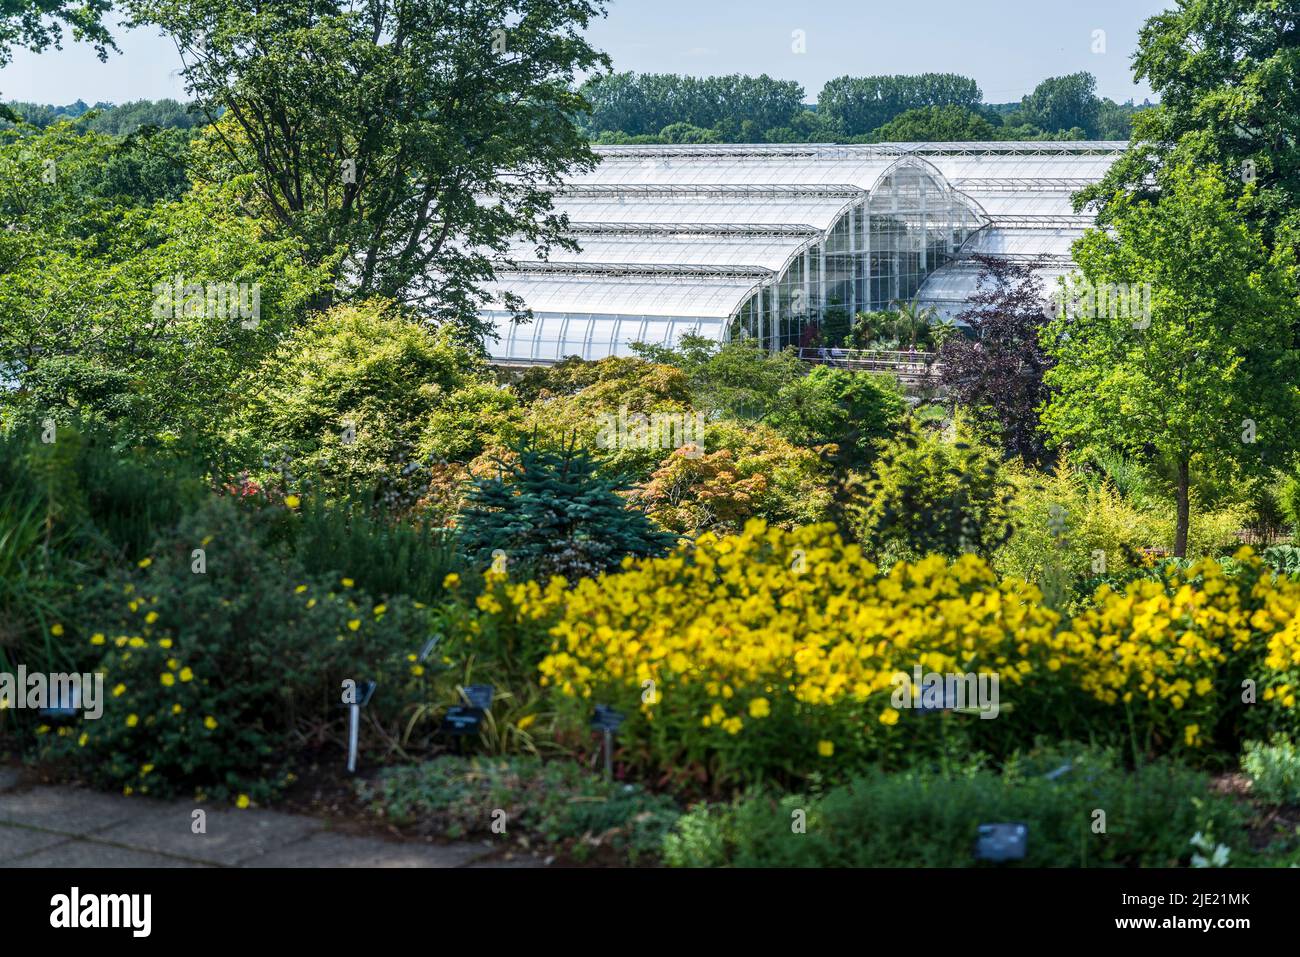 Glasshouse and Oenothera fruticosa subsp. glauca, Narrow-leaved sundrops in the foreground, RHS Wisley Gardens, Surrey, England, UK Stock Photo